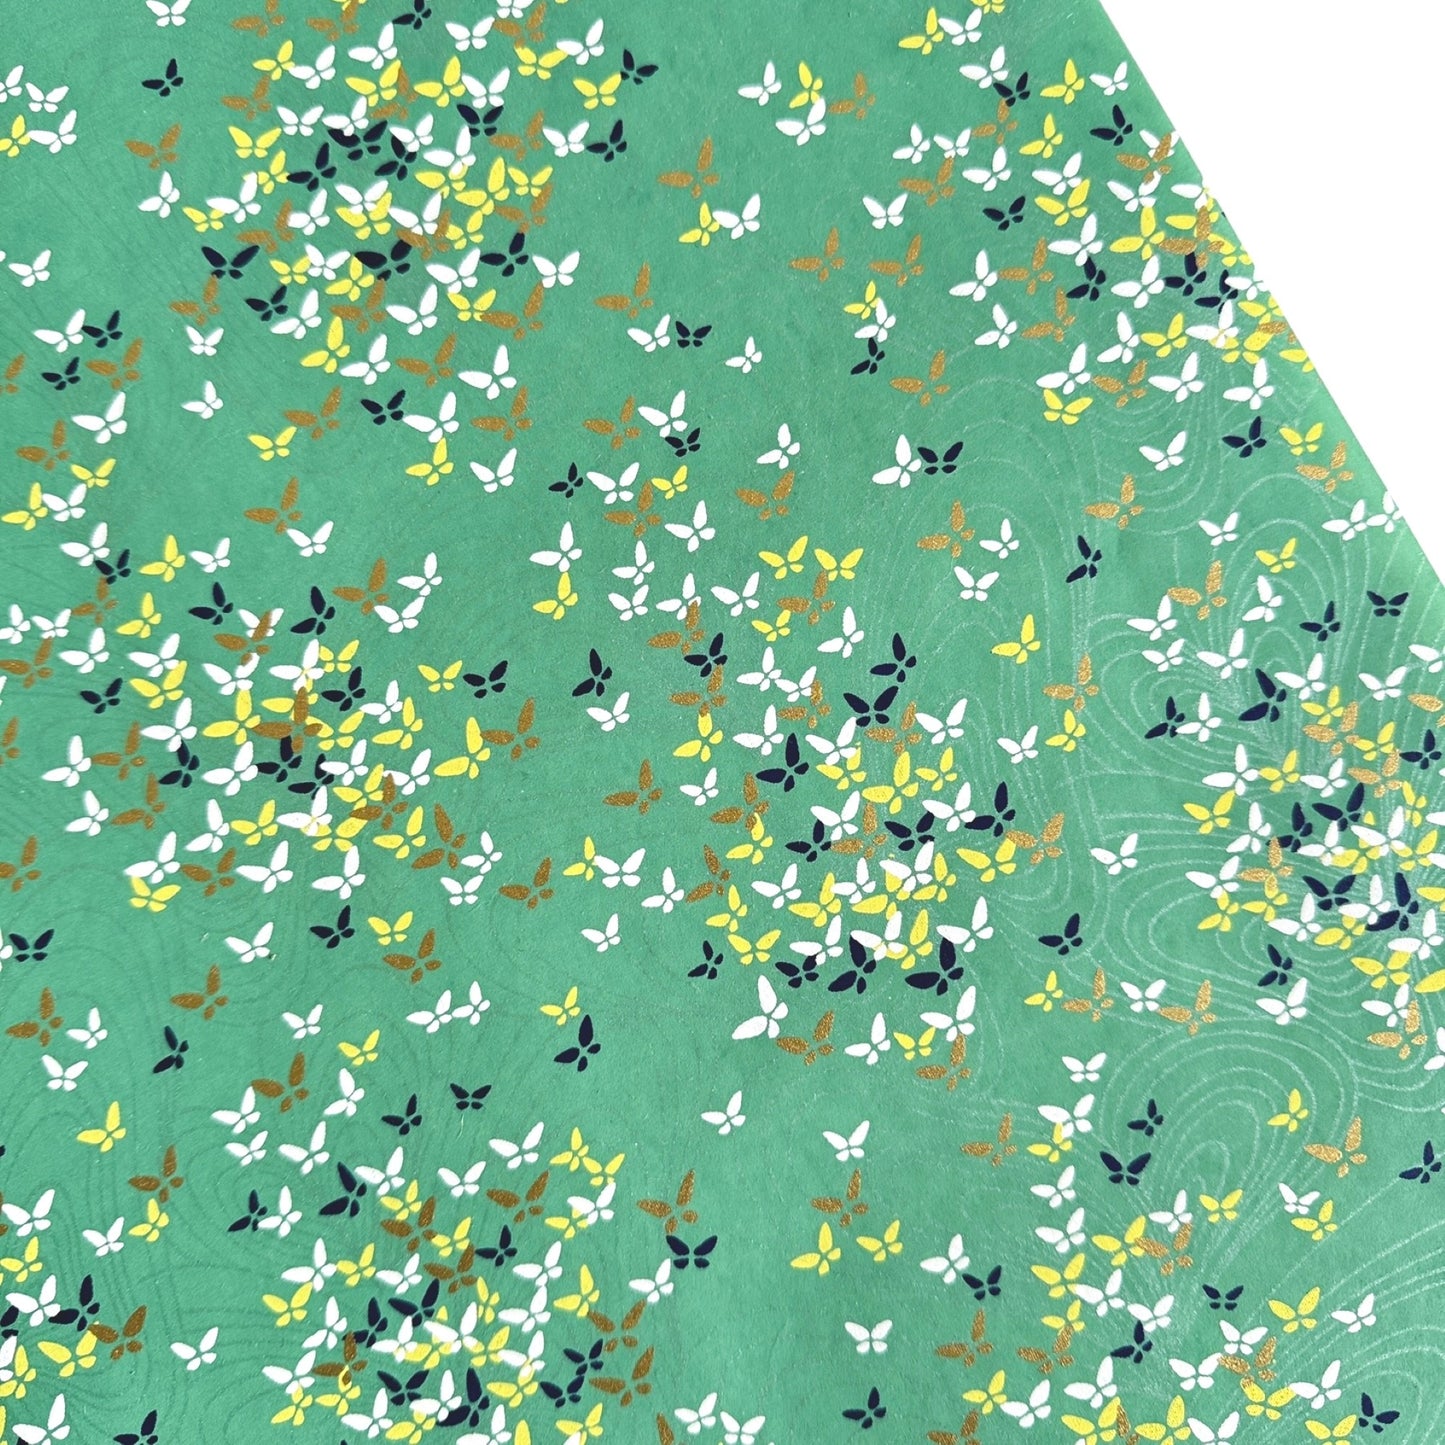 Japanese silkscreen chiyogami paper with a delicate butterfly pattern on a teal backdrop